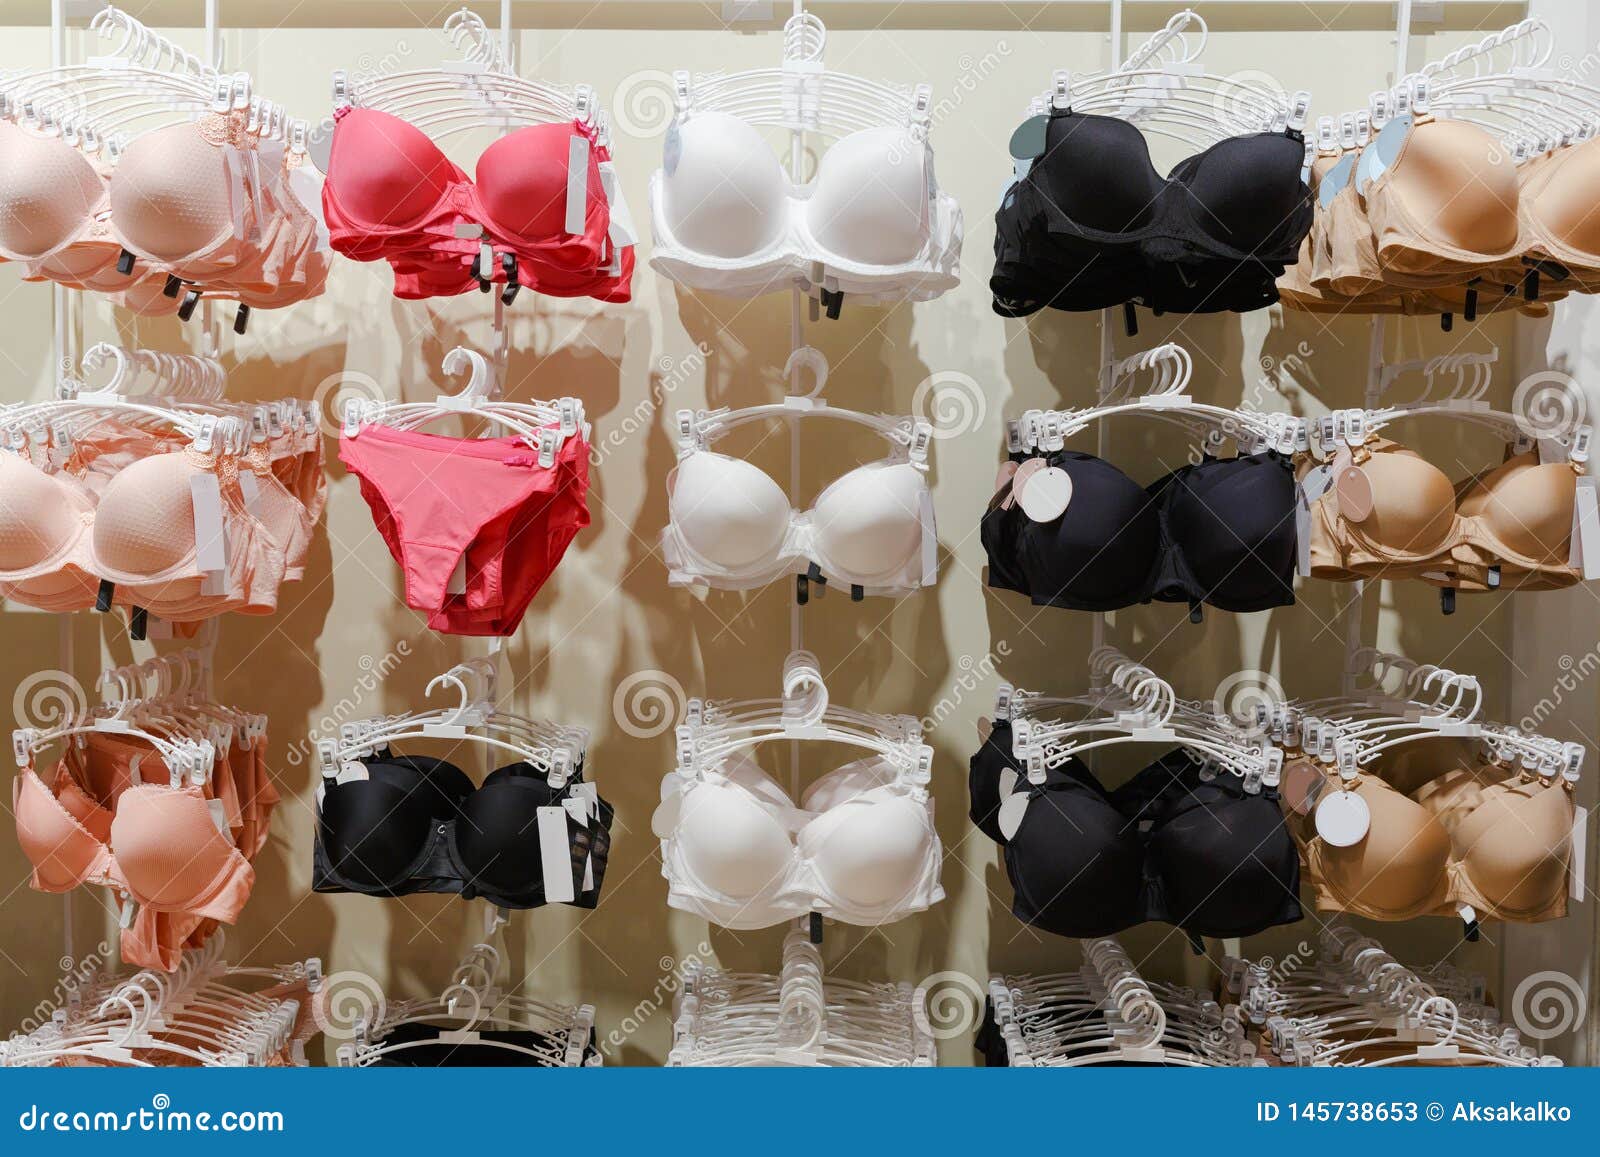 Shop Woman Underwear Clothes, Bra in the Shopping Mall Stock Image